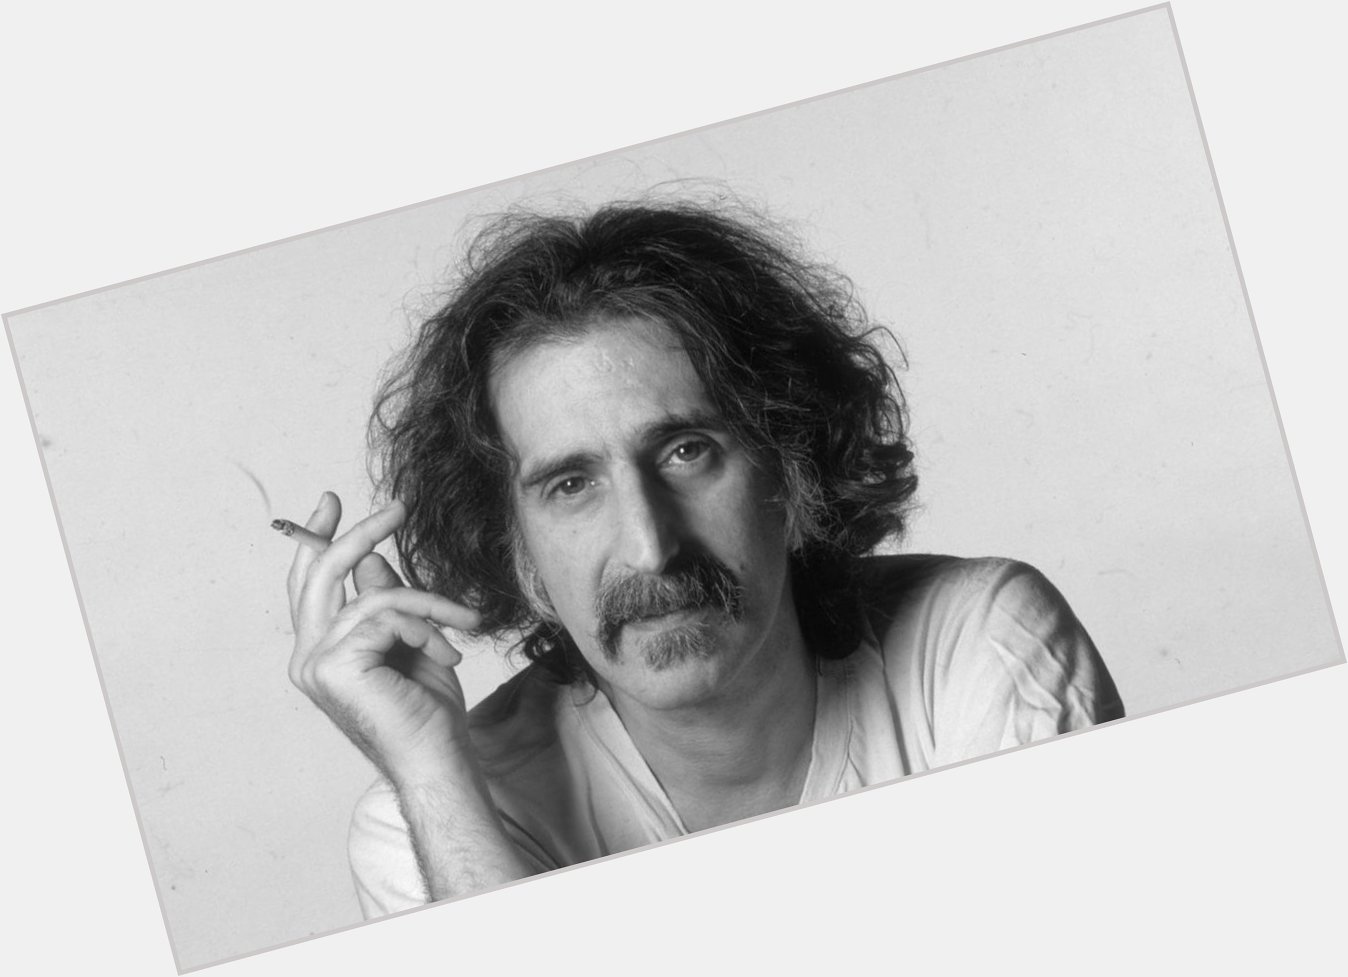 Happy birthday to the late Frank Zappa, who was born on this day in 1940 